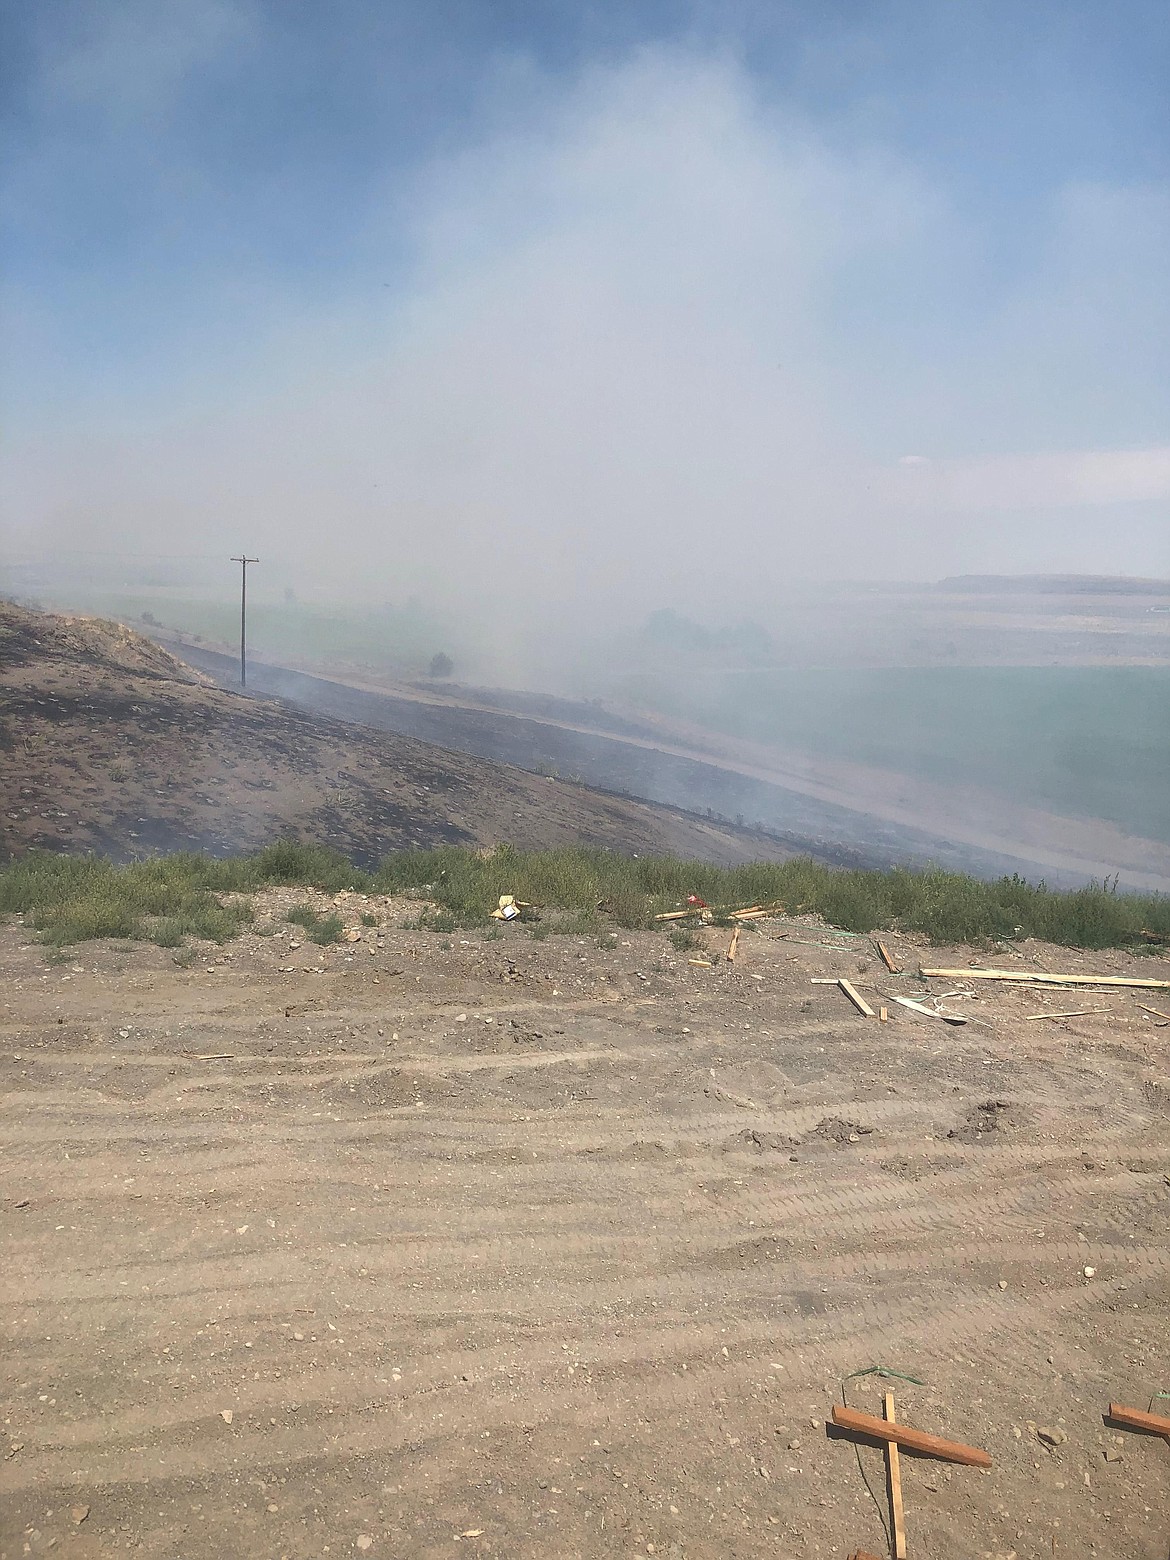 Smoke from a fire along S.R. 28 between Soap Lake and Stratford on Monday. The fire prompted the Grant County Sheriff's Office to issue a Level 3 evacuation order affecting roughly 20 homes and prompted firefighters from as far away as Wilson Creek to respond.